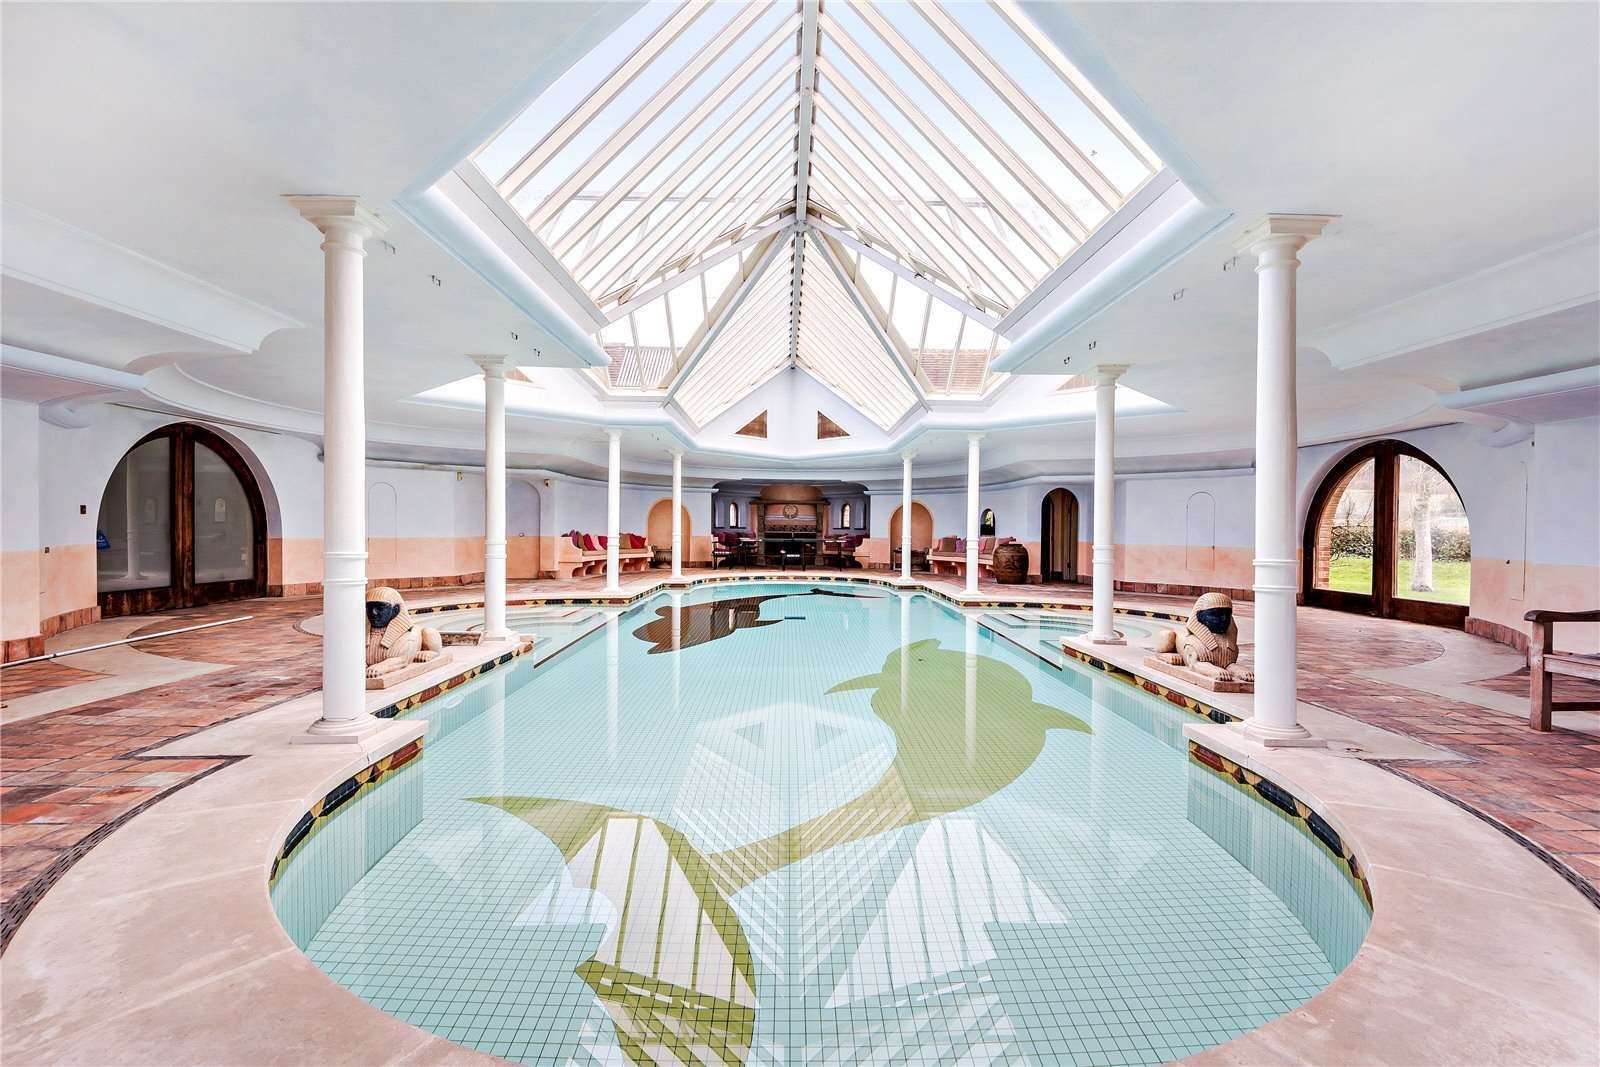 The swimming pool which is housed within its own complex at Luddesdown Court. Photo: Savills